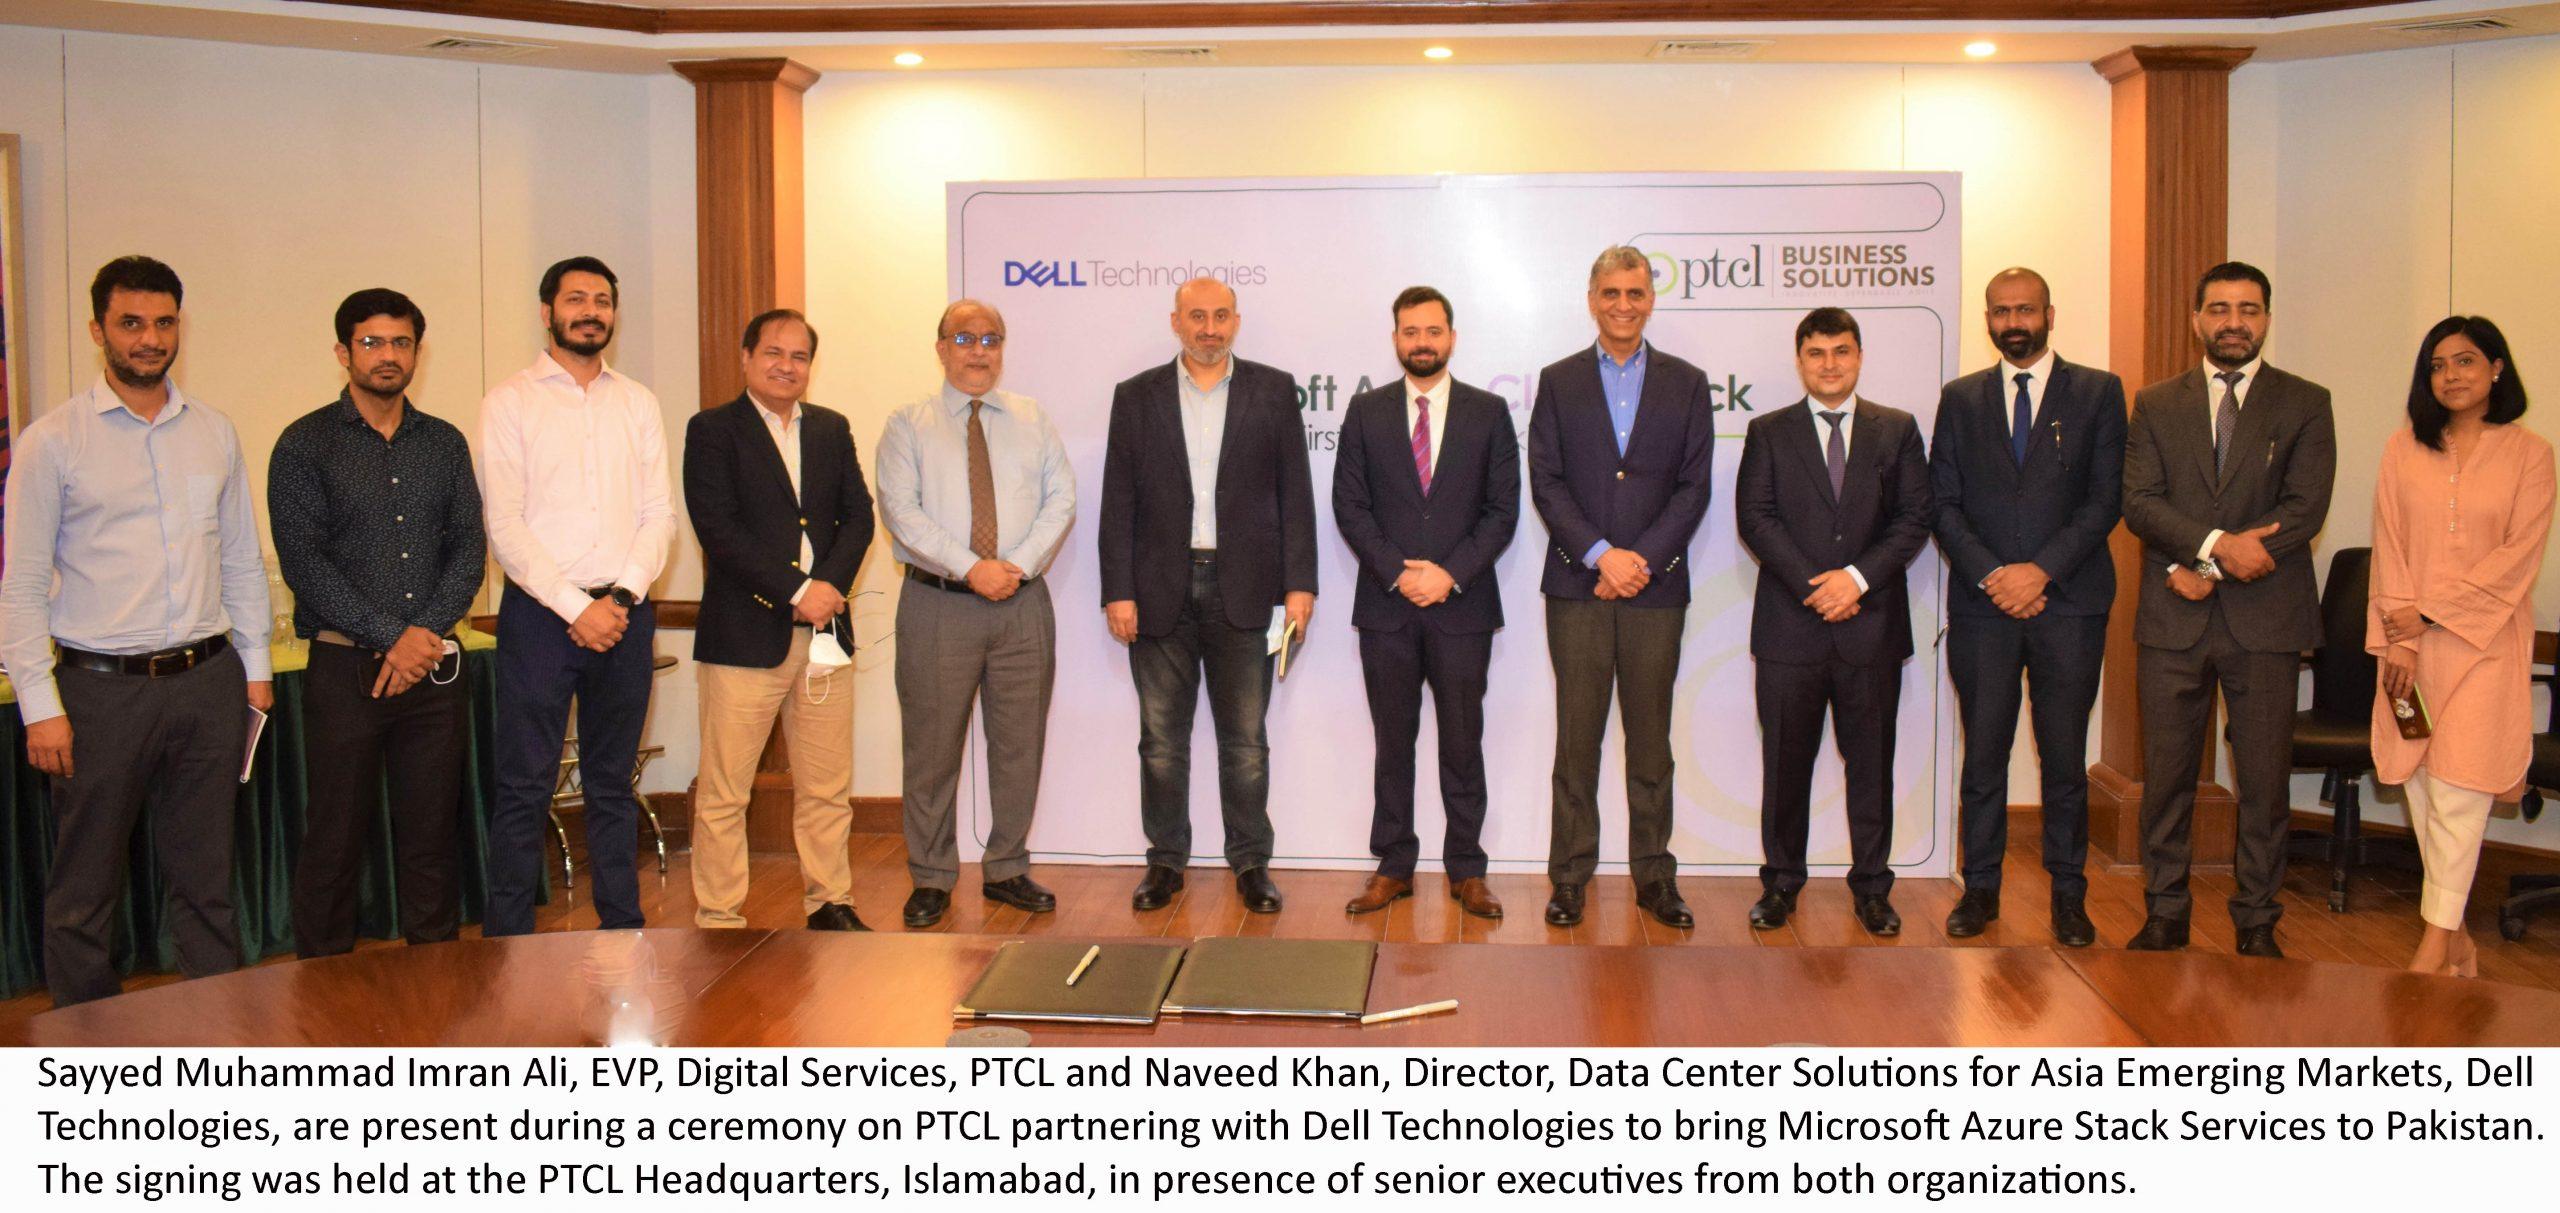 PTCL partners with Dell Technologies to bring Microsoft Azure Stack Services to Pakistan